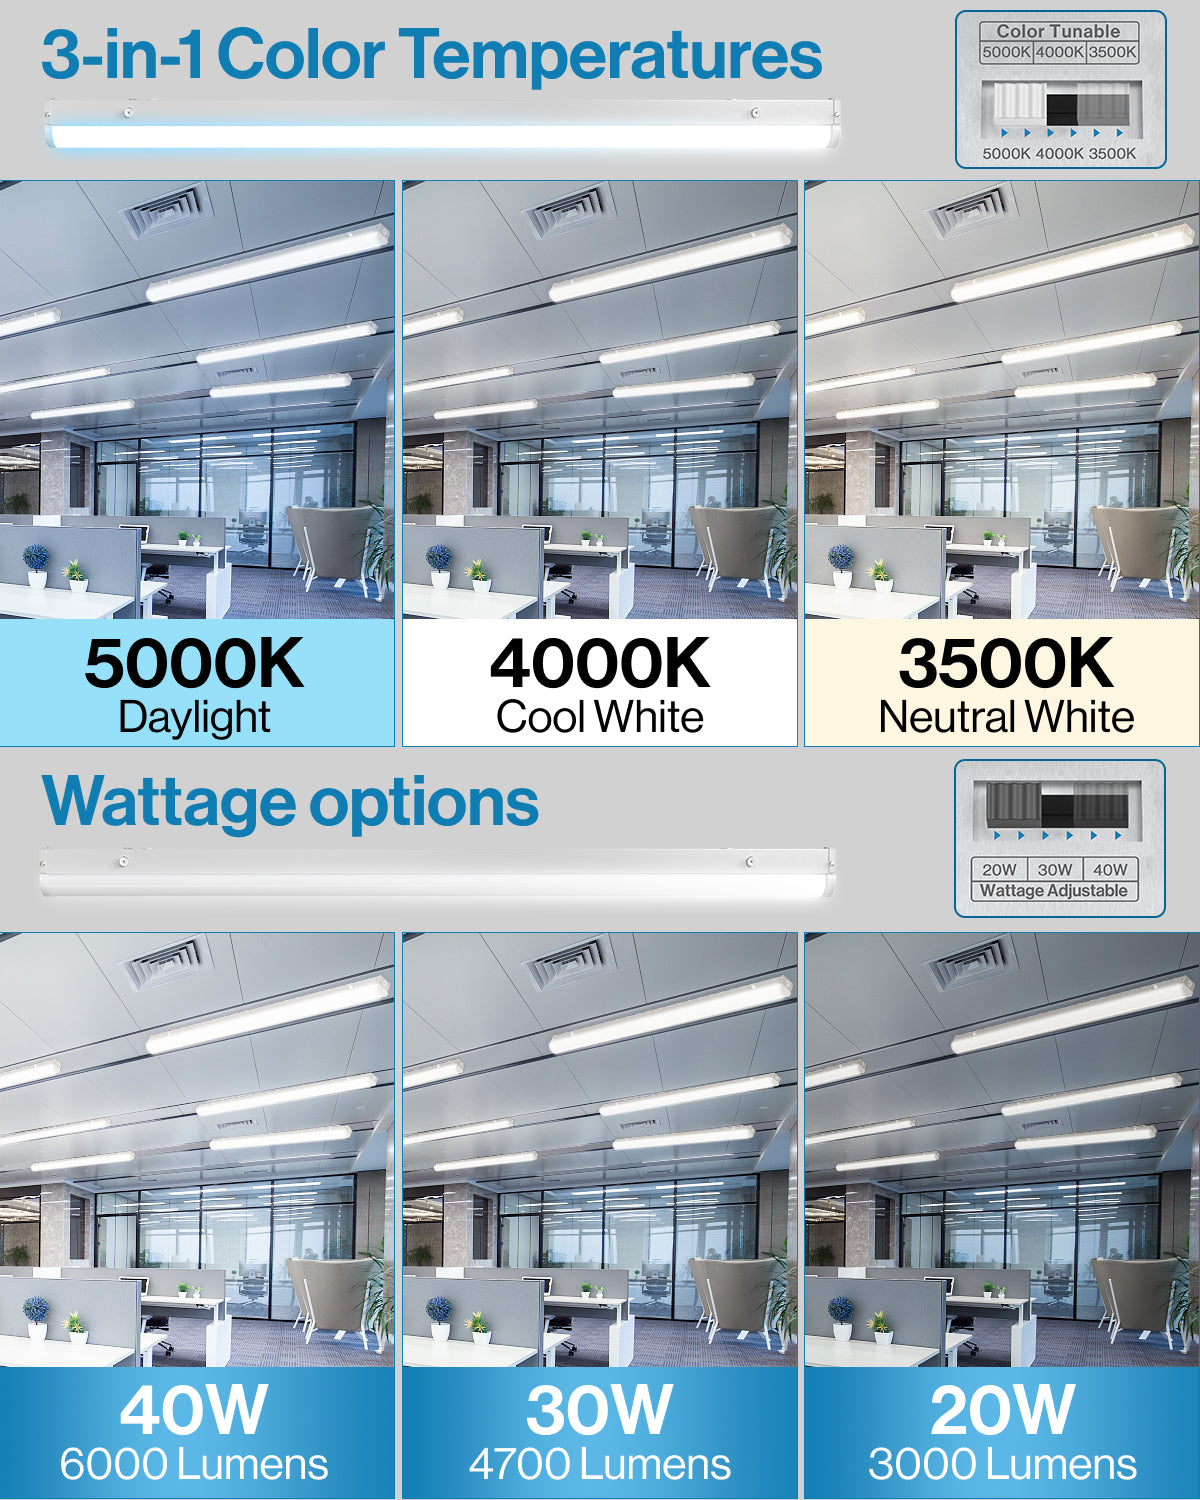 Try out the various wattage options (40W, 30W, 20W) and color temperature options (5000K, 4000K, 3500K) using the slider switch on back of the LED strip light fixture, then lock in your preference during the installation process.